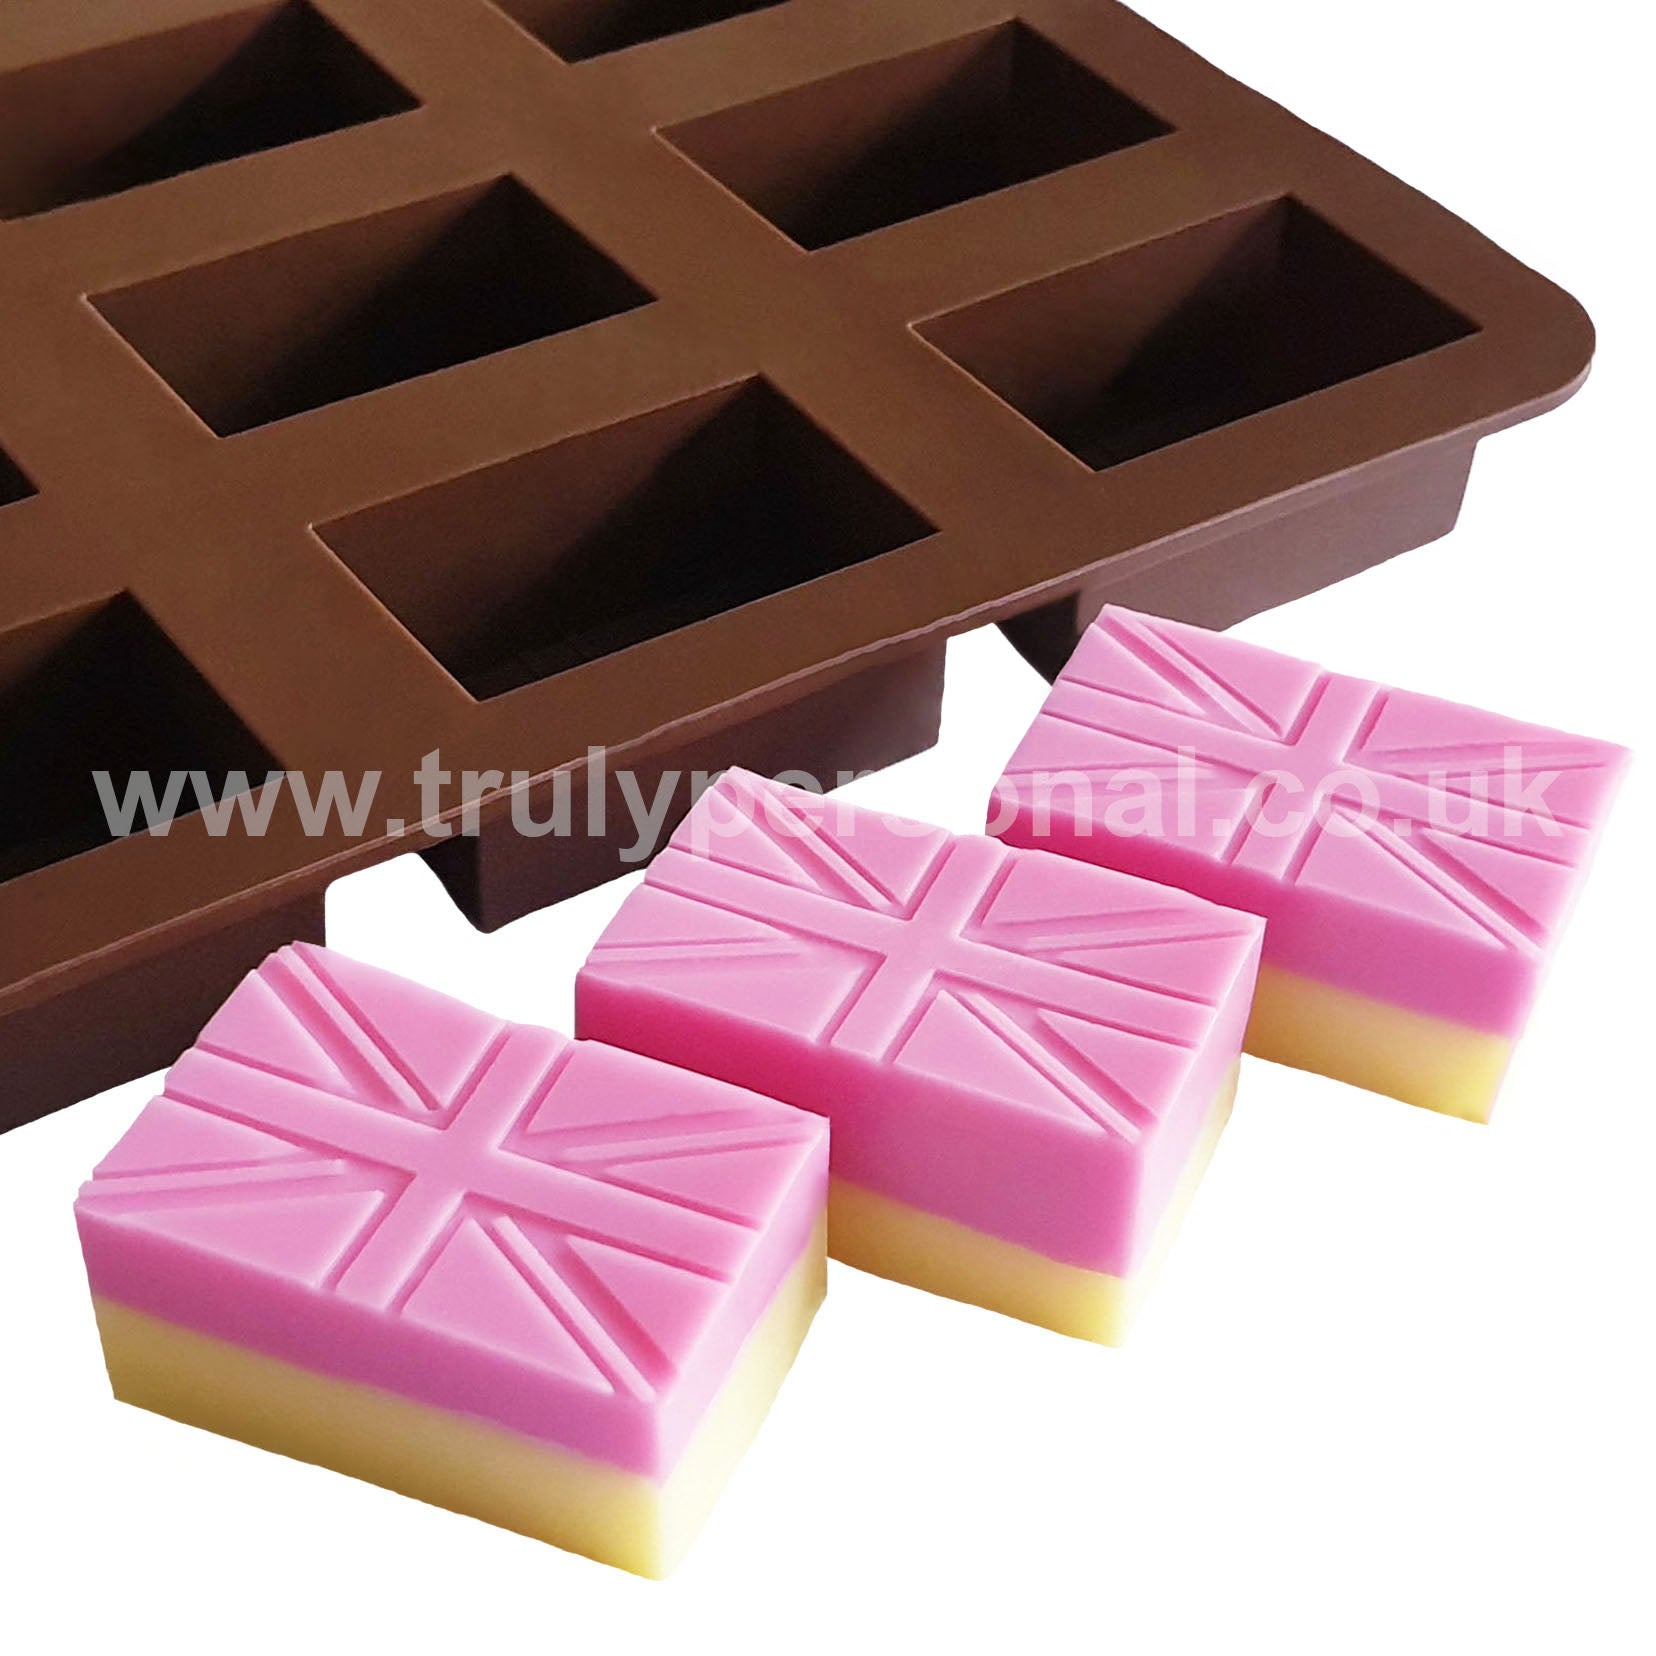 Union Jack Silicone Mould | Wax Melts | Truly Personal Ltd